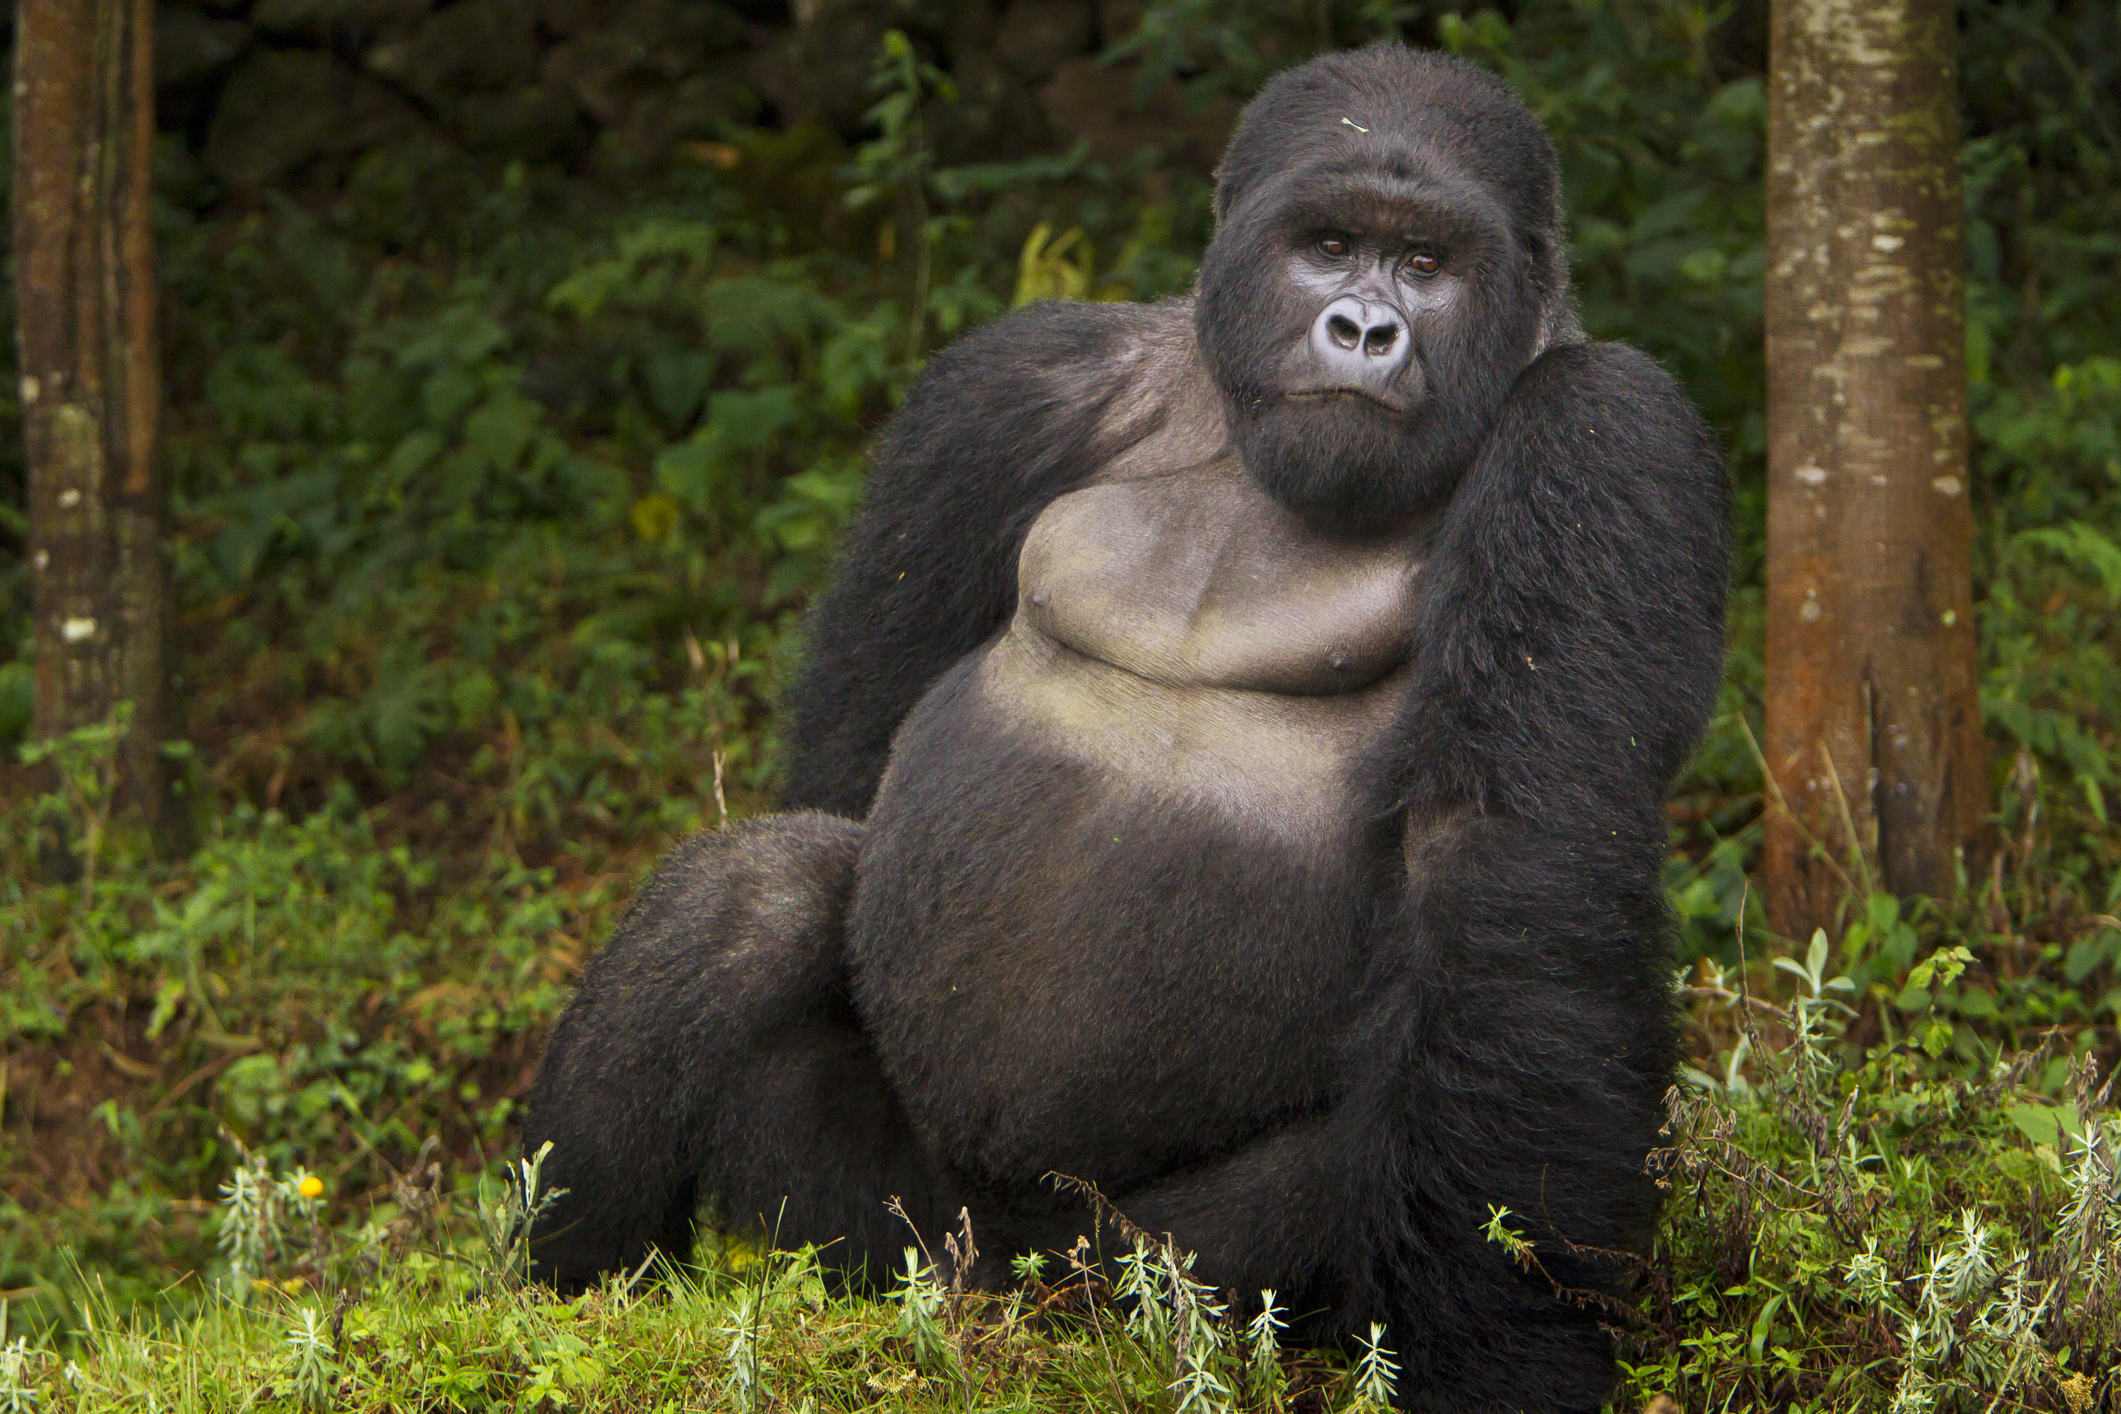 Facts about silverback gorillas